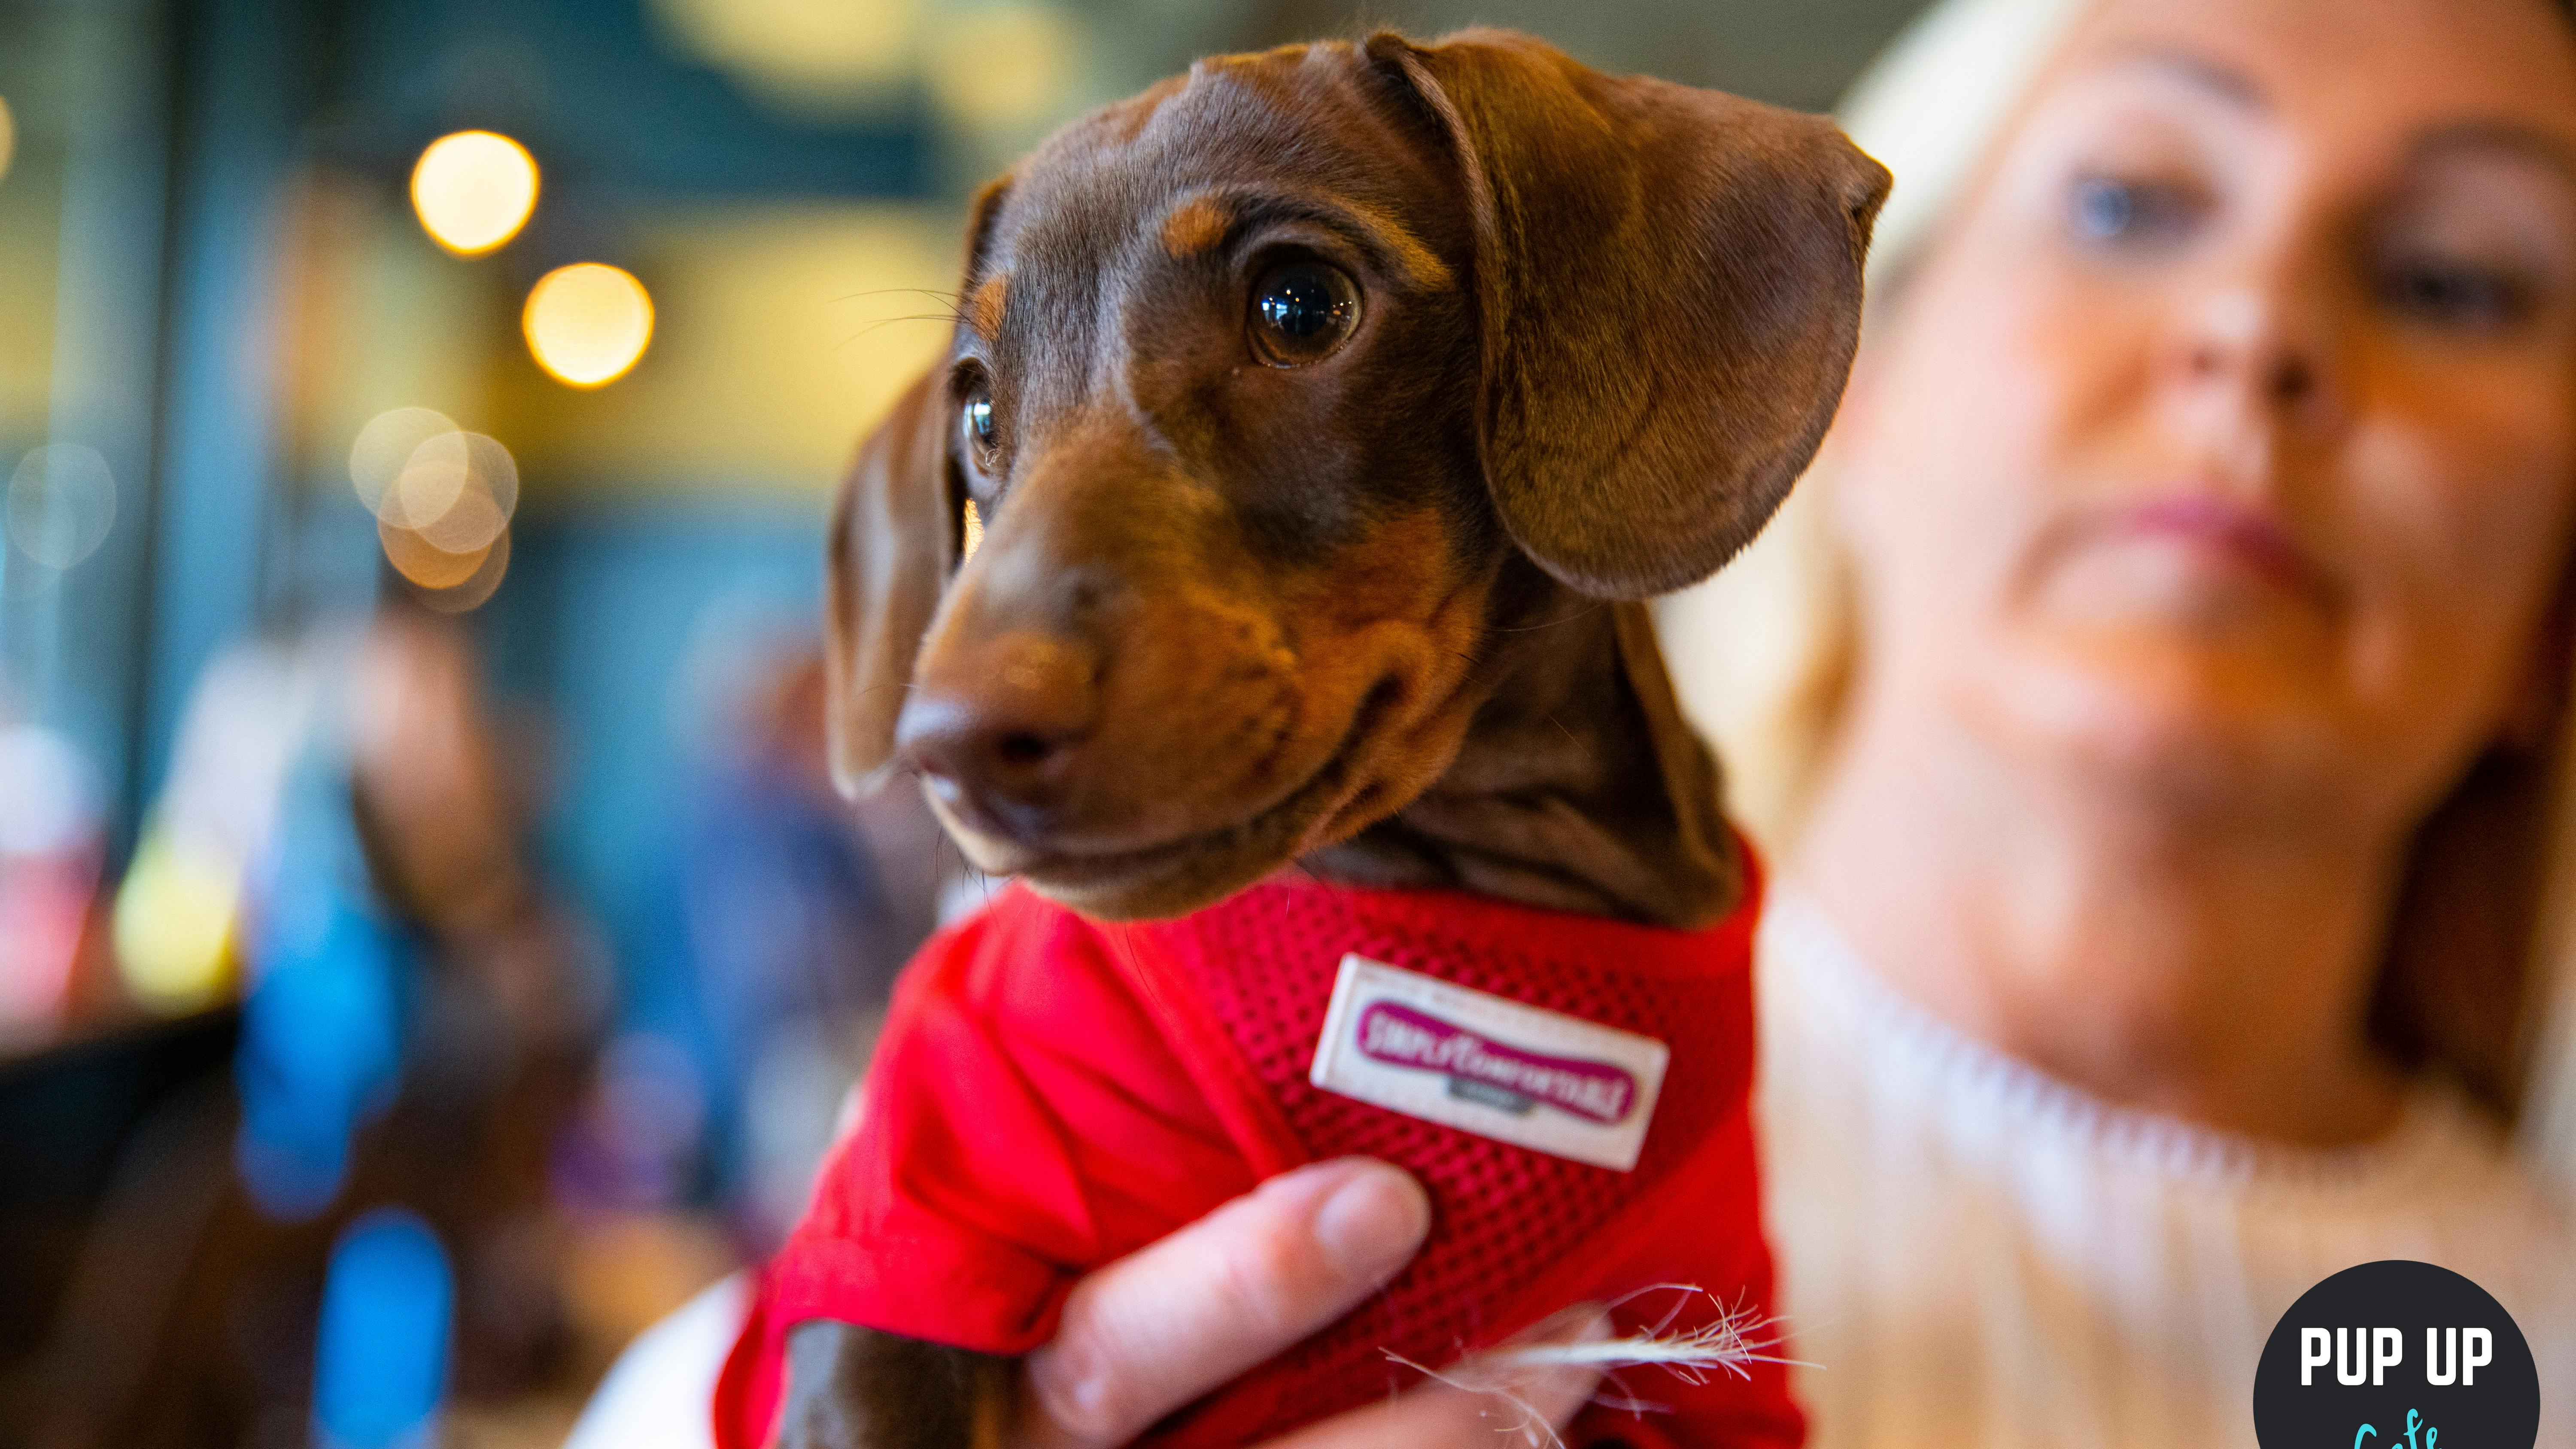 Pop-up cafe filled with sausage dogs coming to Lancashire